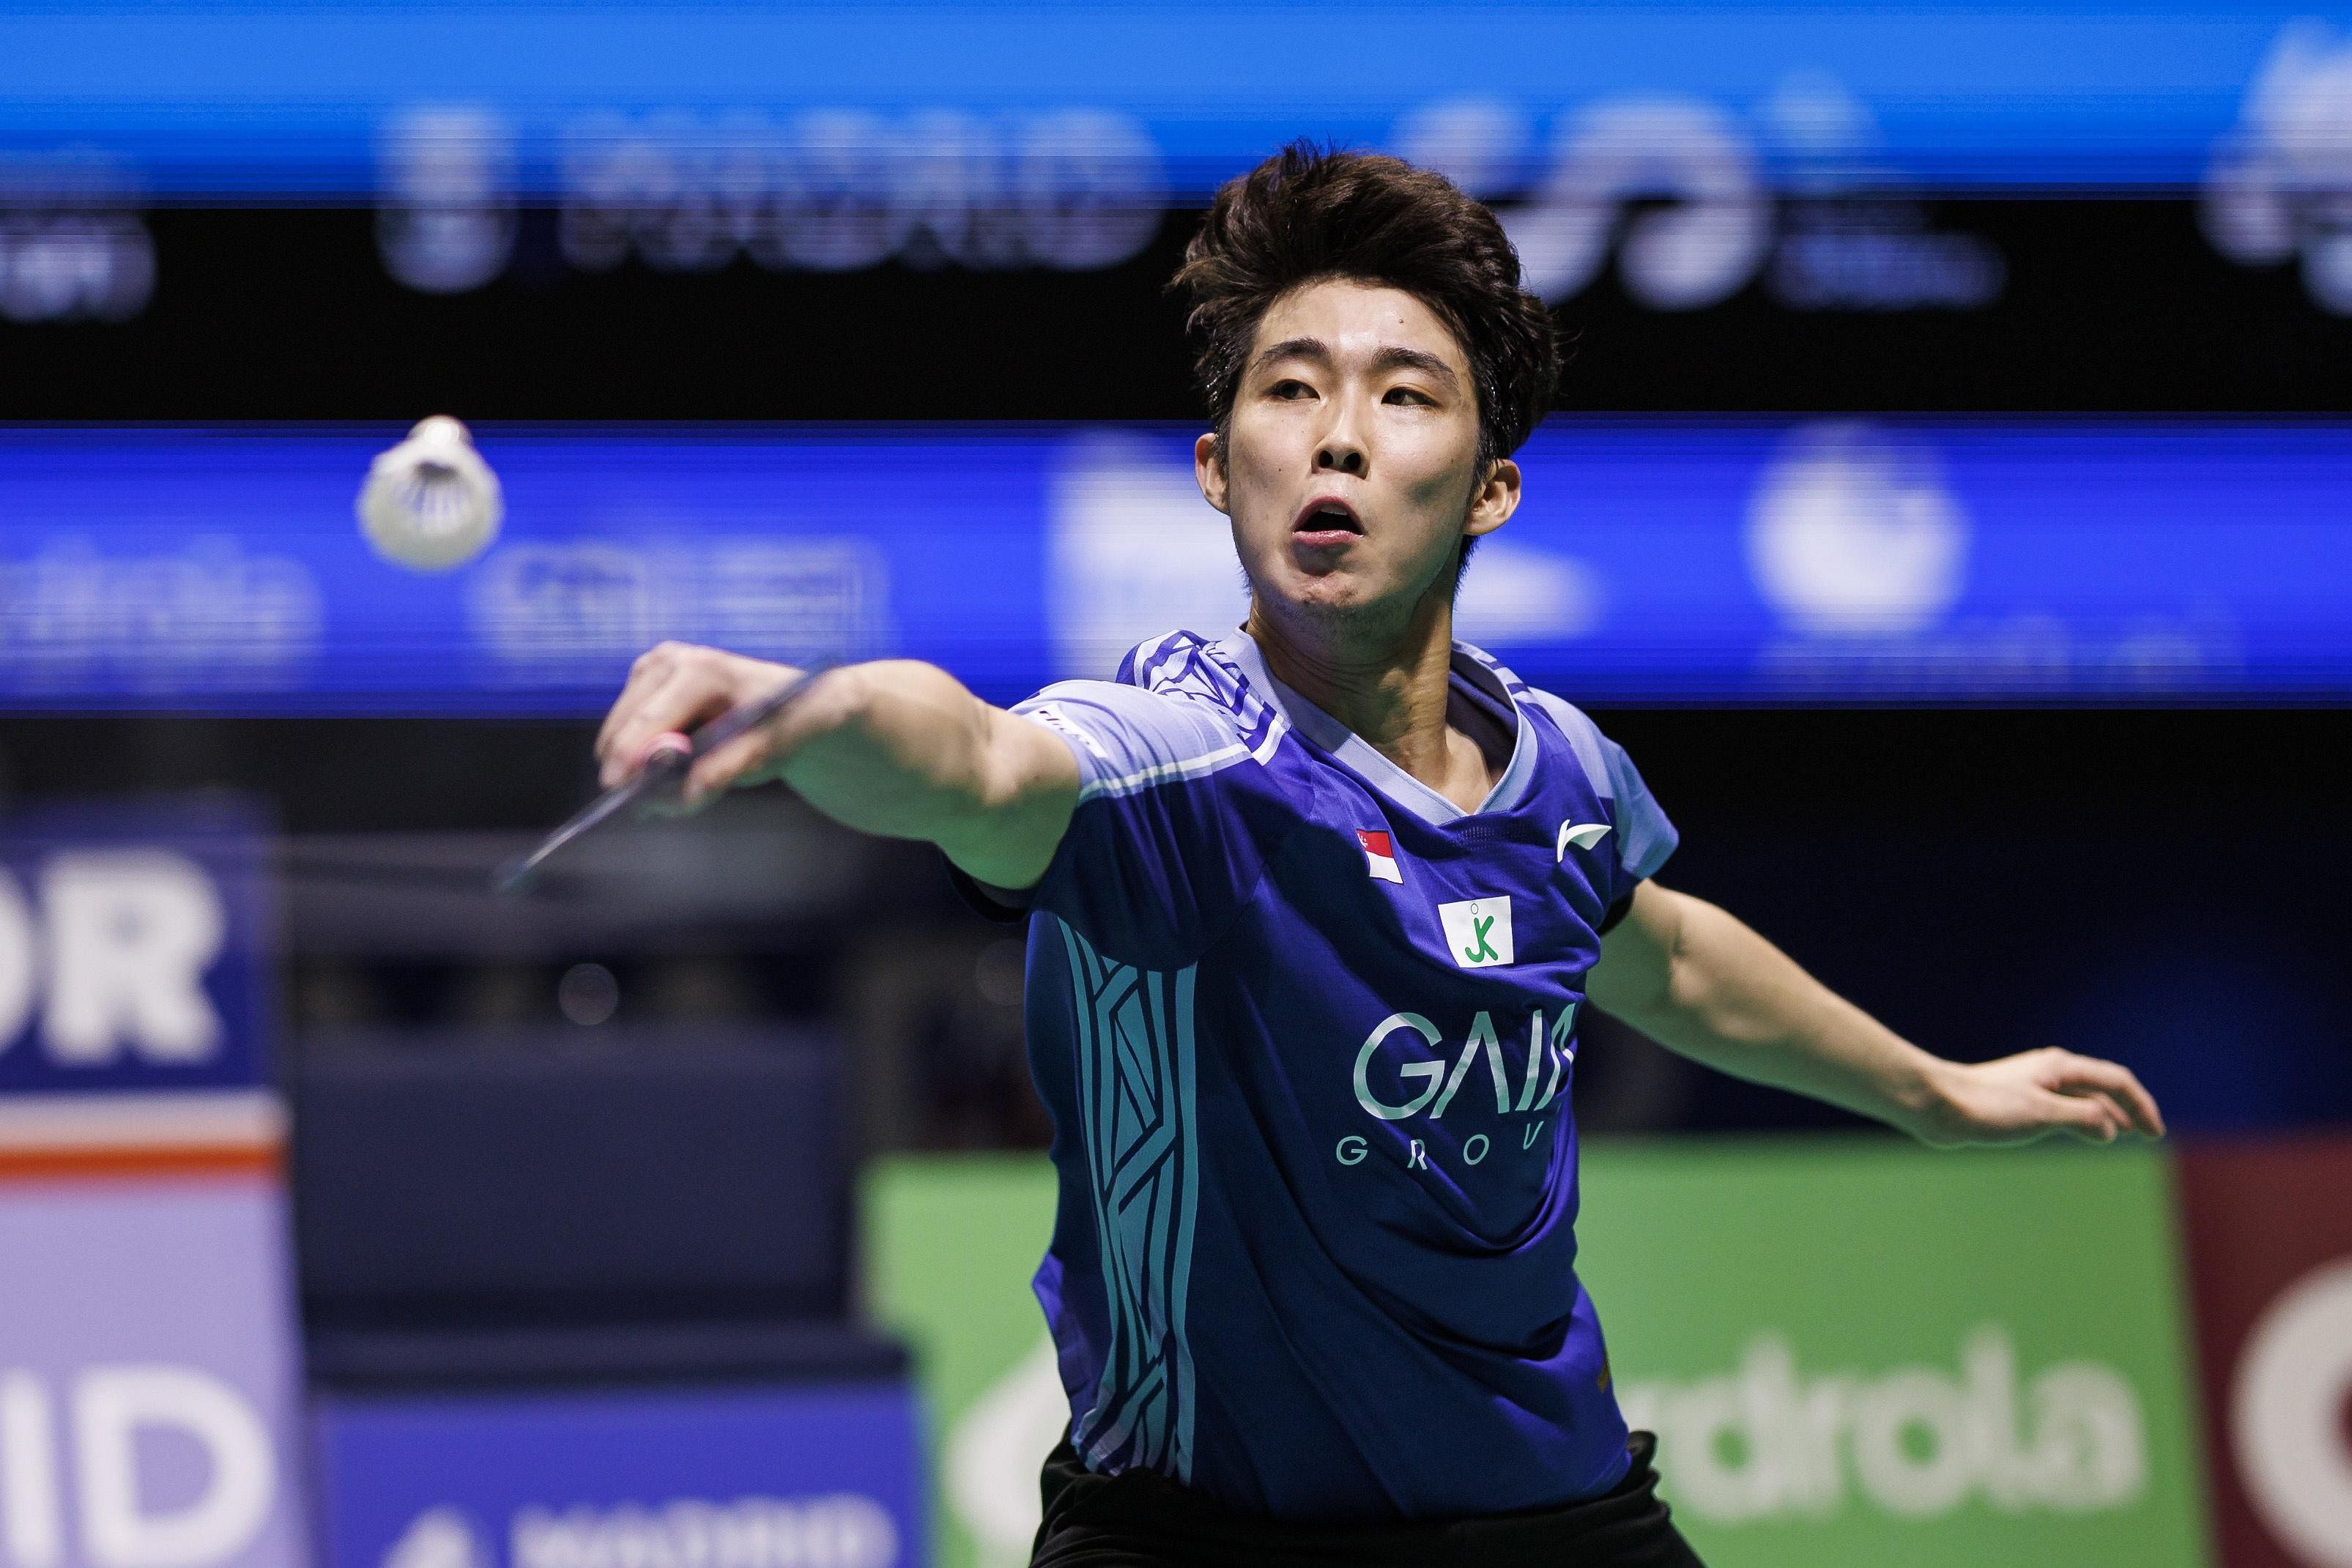 Loh Kean Yew suffers first-round exit at Badminton Asia Championships, mixed doubles pair advance